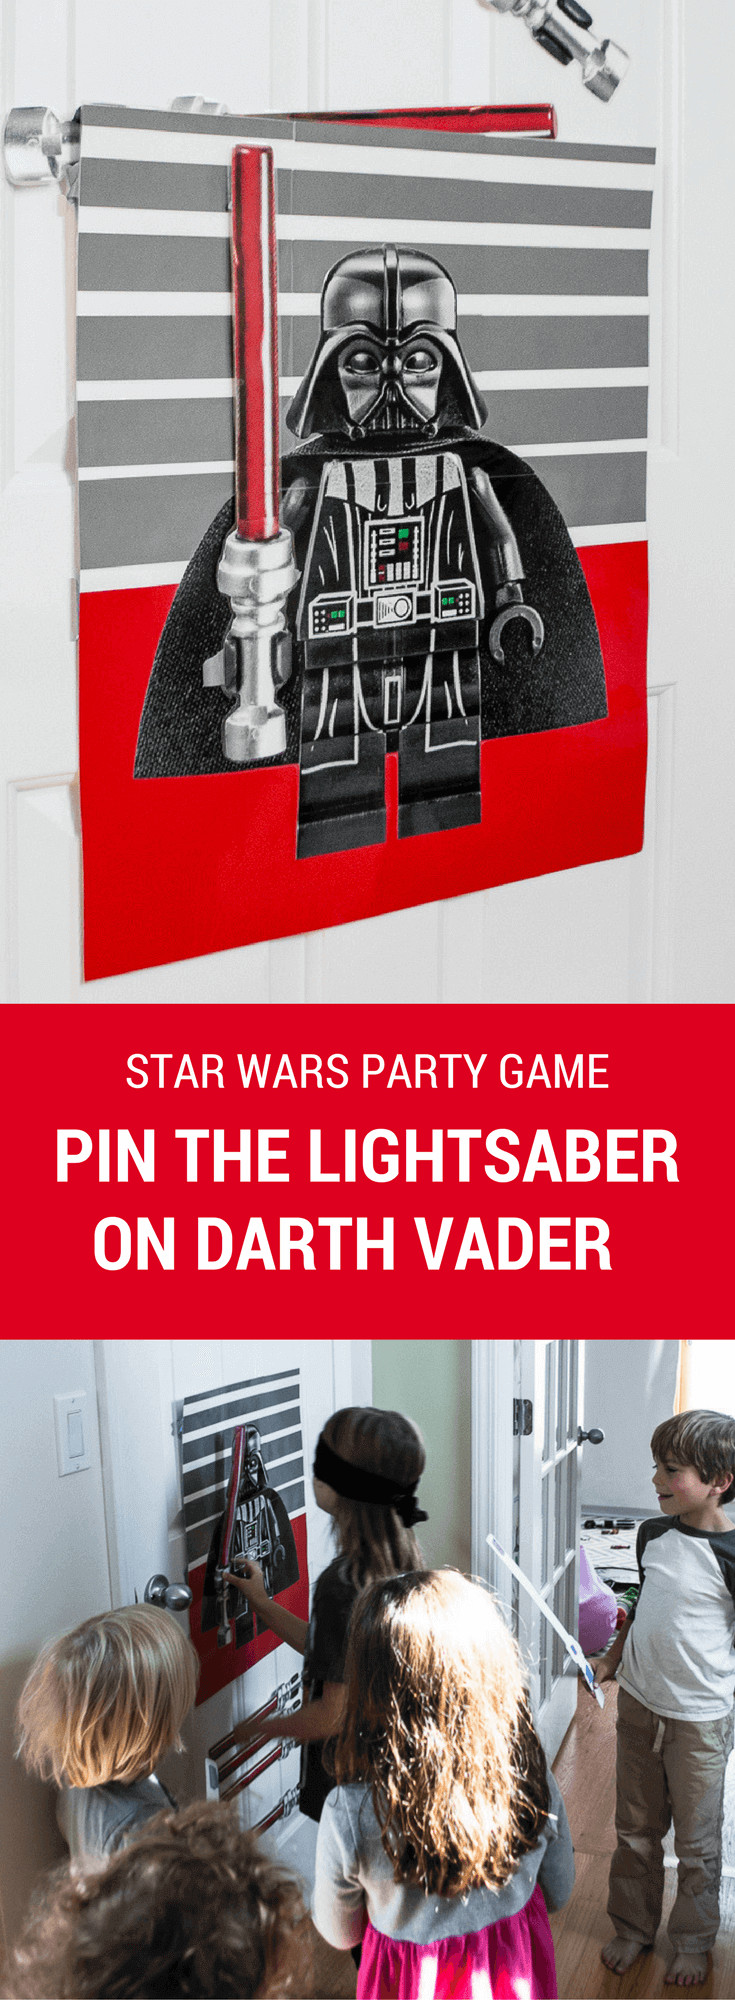 Star Wars Birthday Party Games
 Star Wars DIY Birthday Party Game Pin The Lightsaber